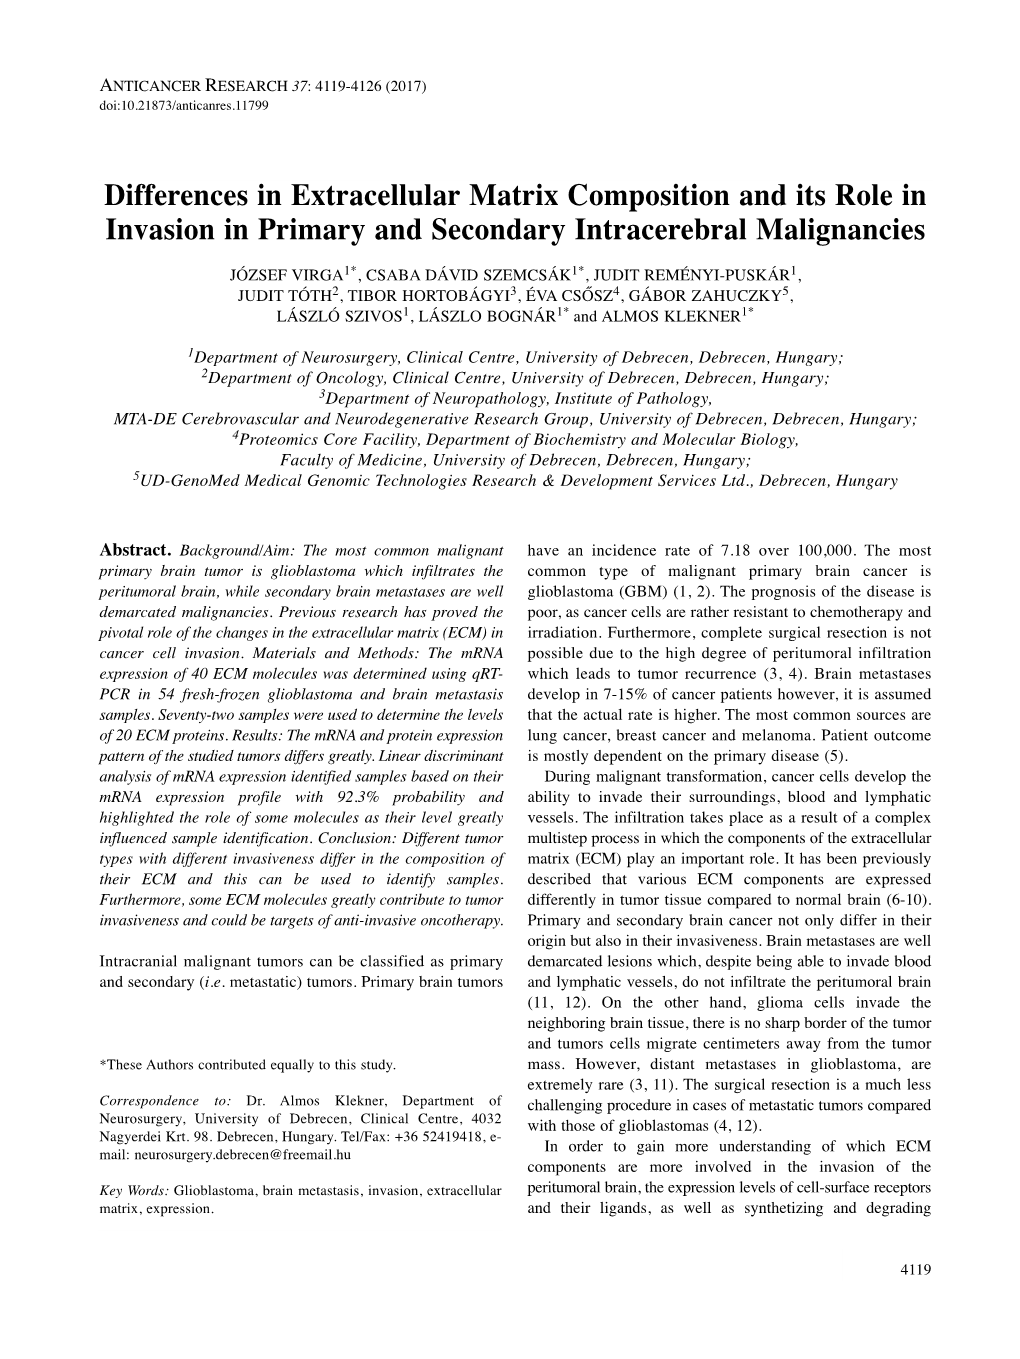 Differences in Extracellular Matrix Composition and Its Role In